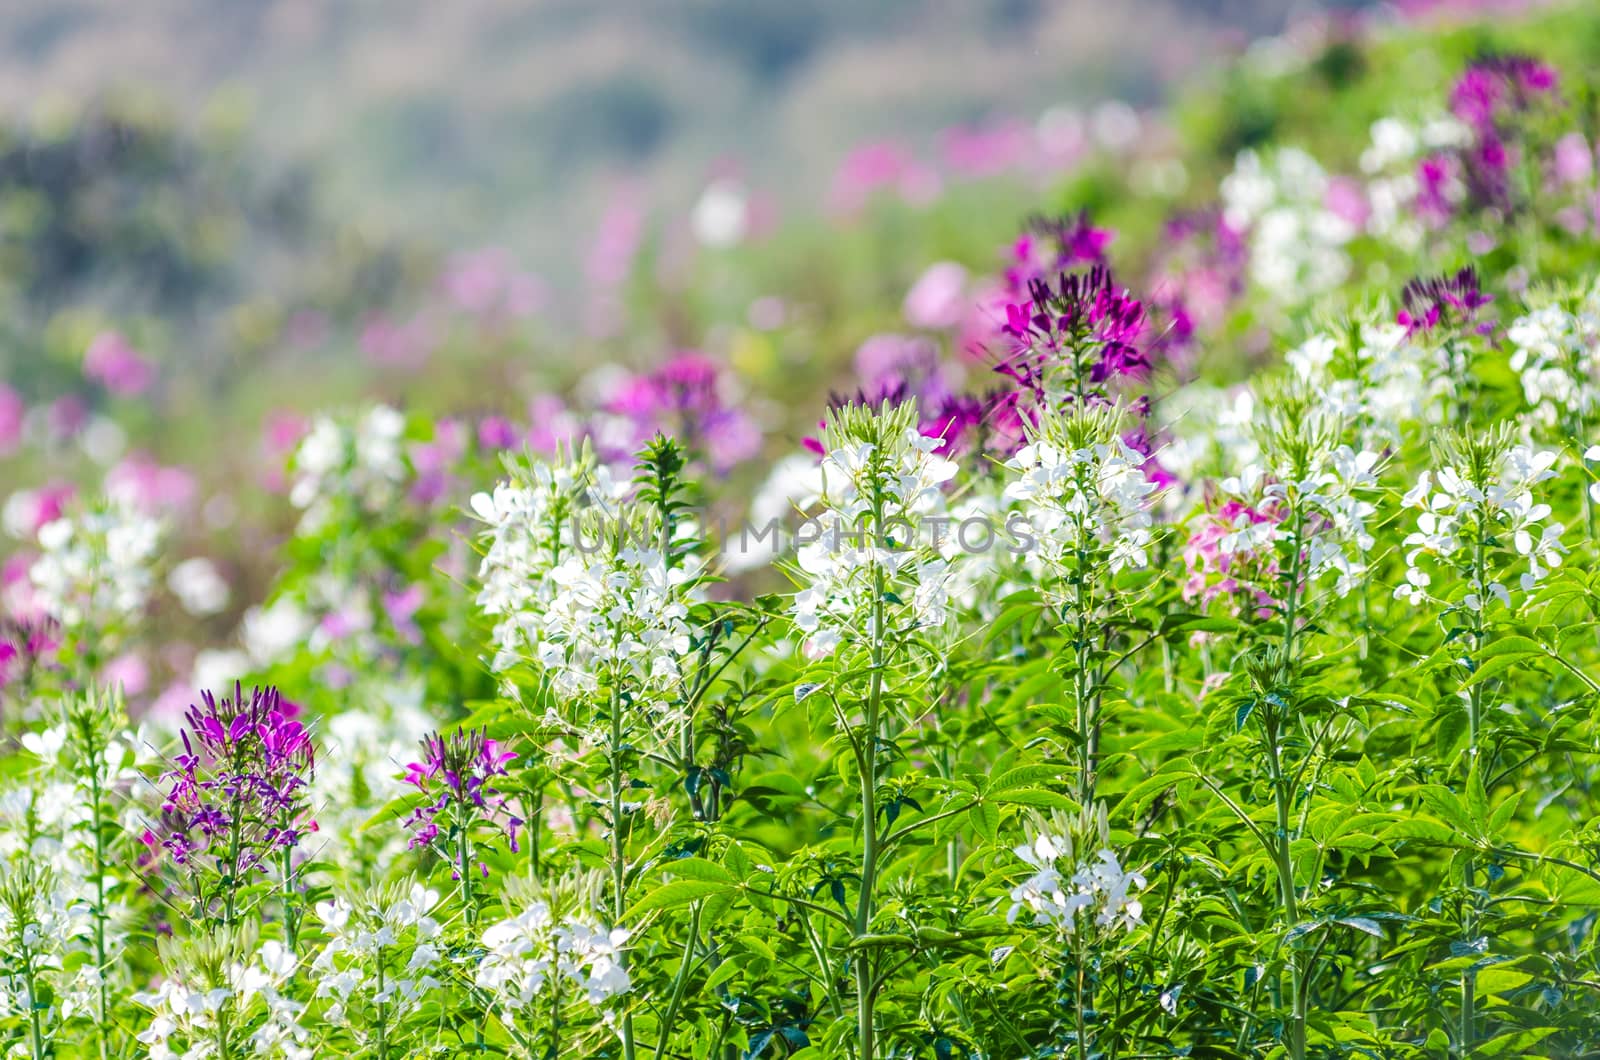 Purple and white flowers in the field with blurred backgroud